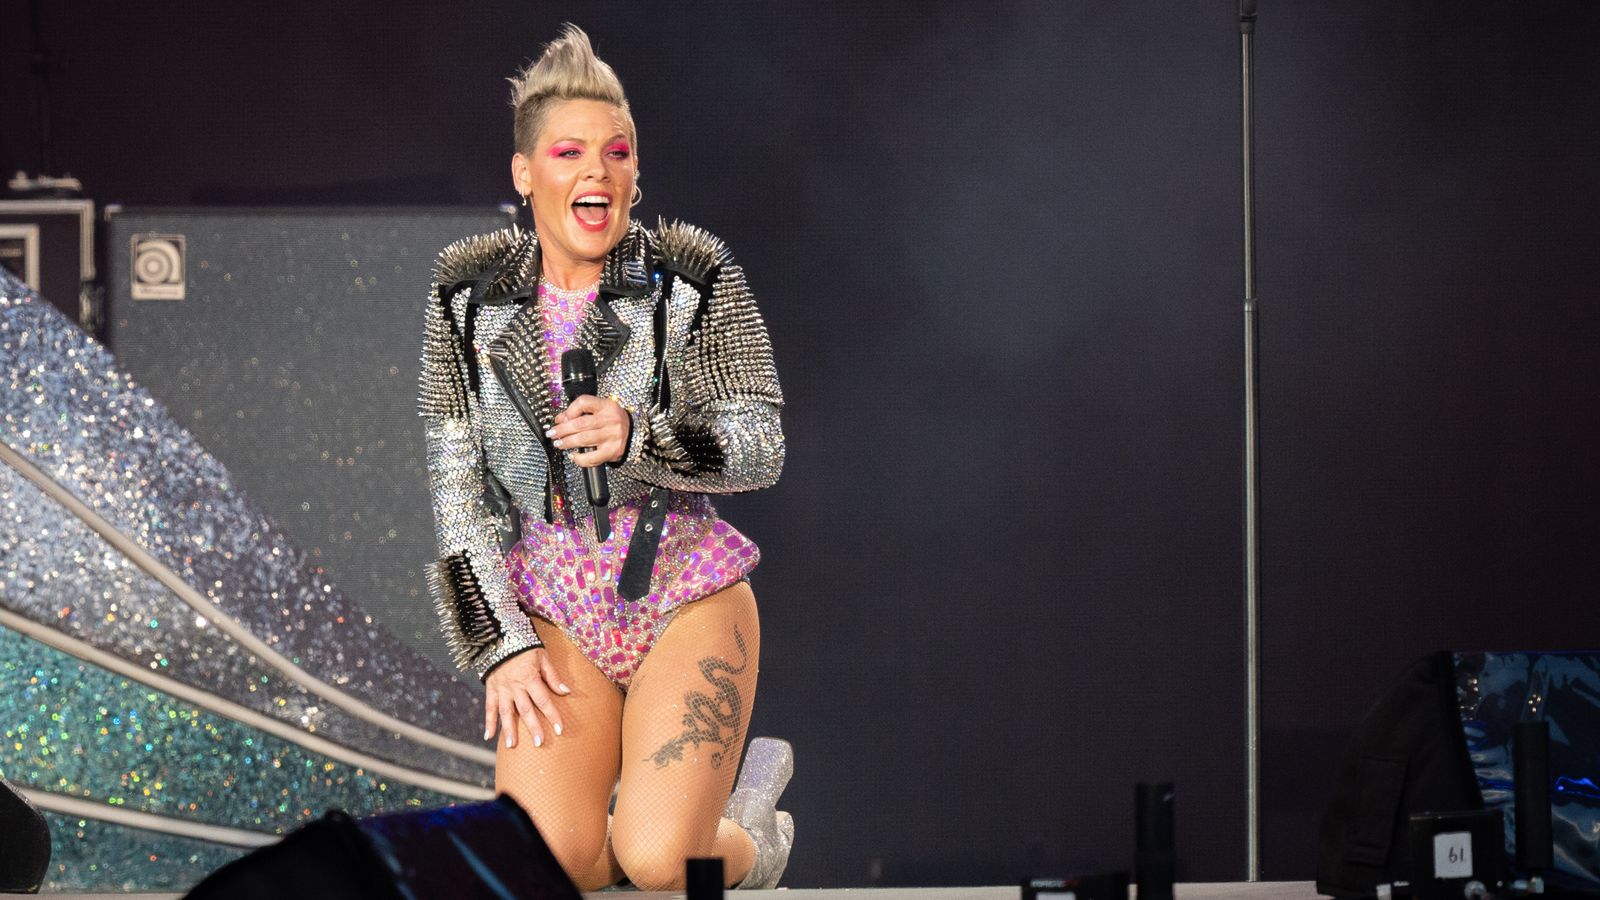 BST Hyde Park: Pink stunned after fan throws mother's ashes on stage - 'I don't know how to feel about this' | Ents & Arts News